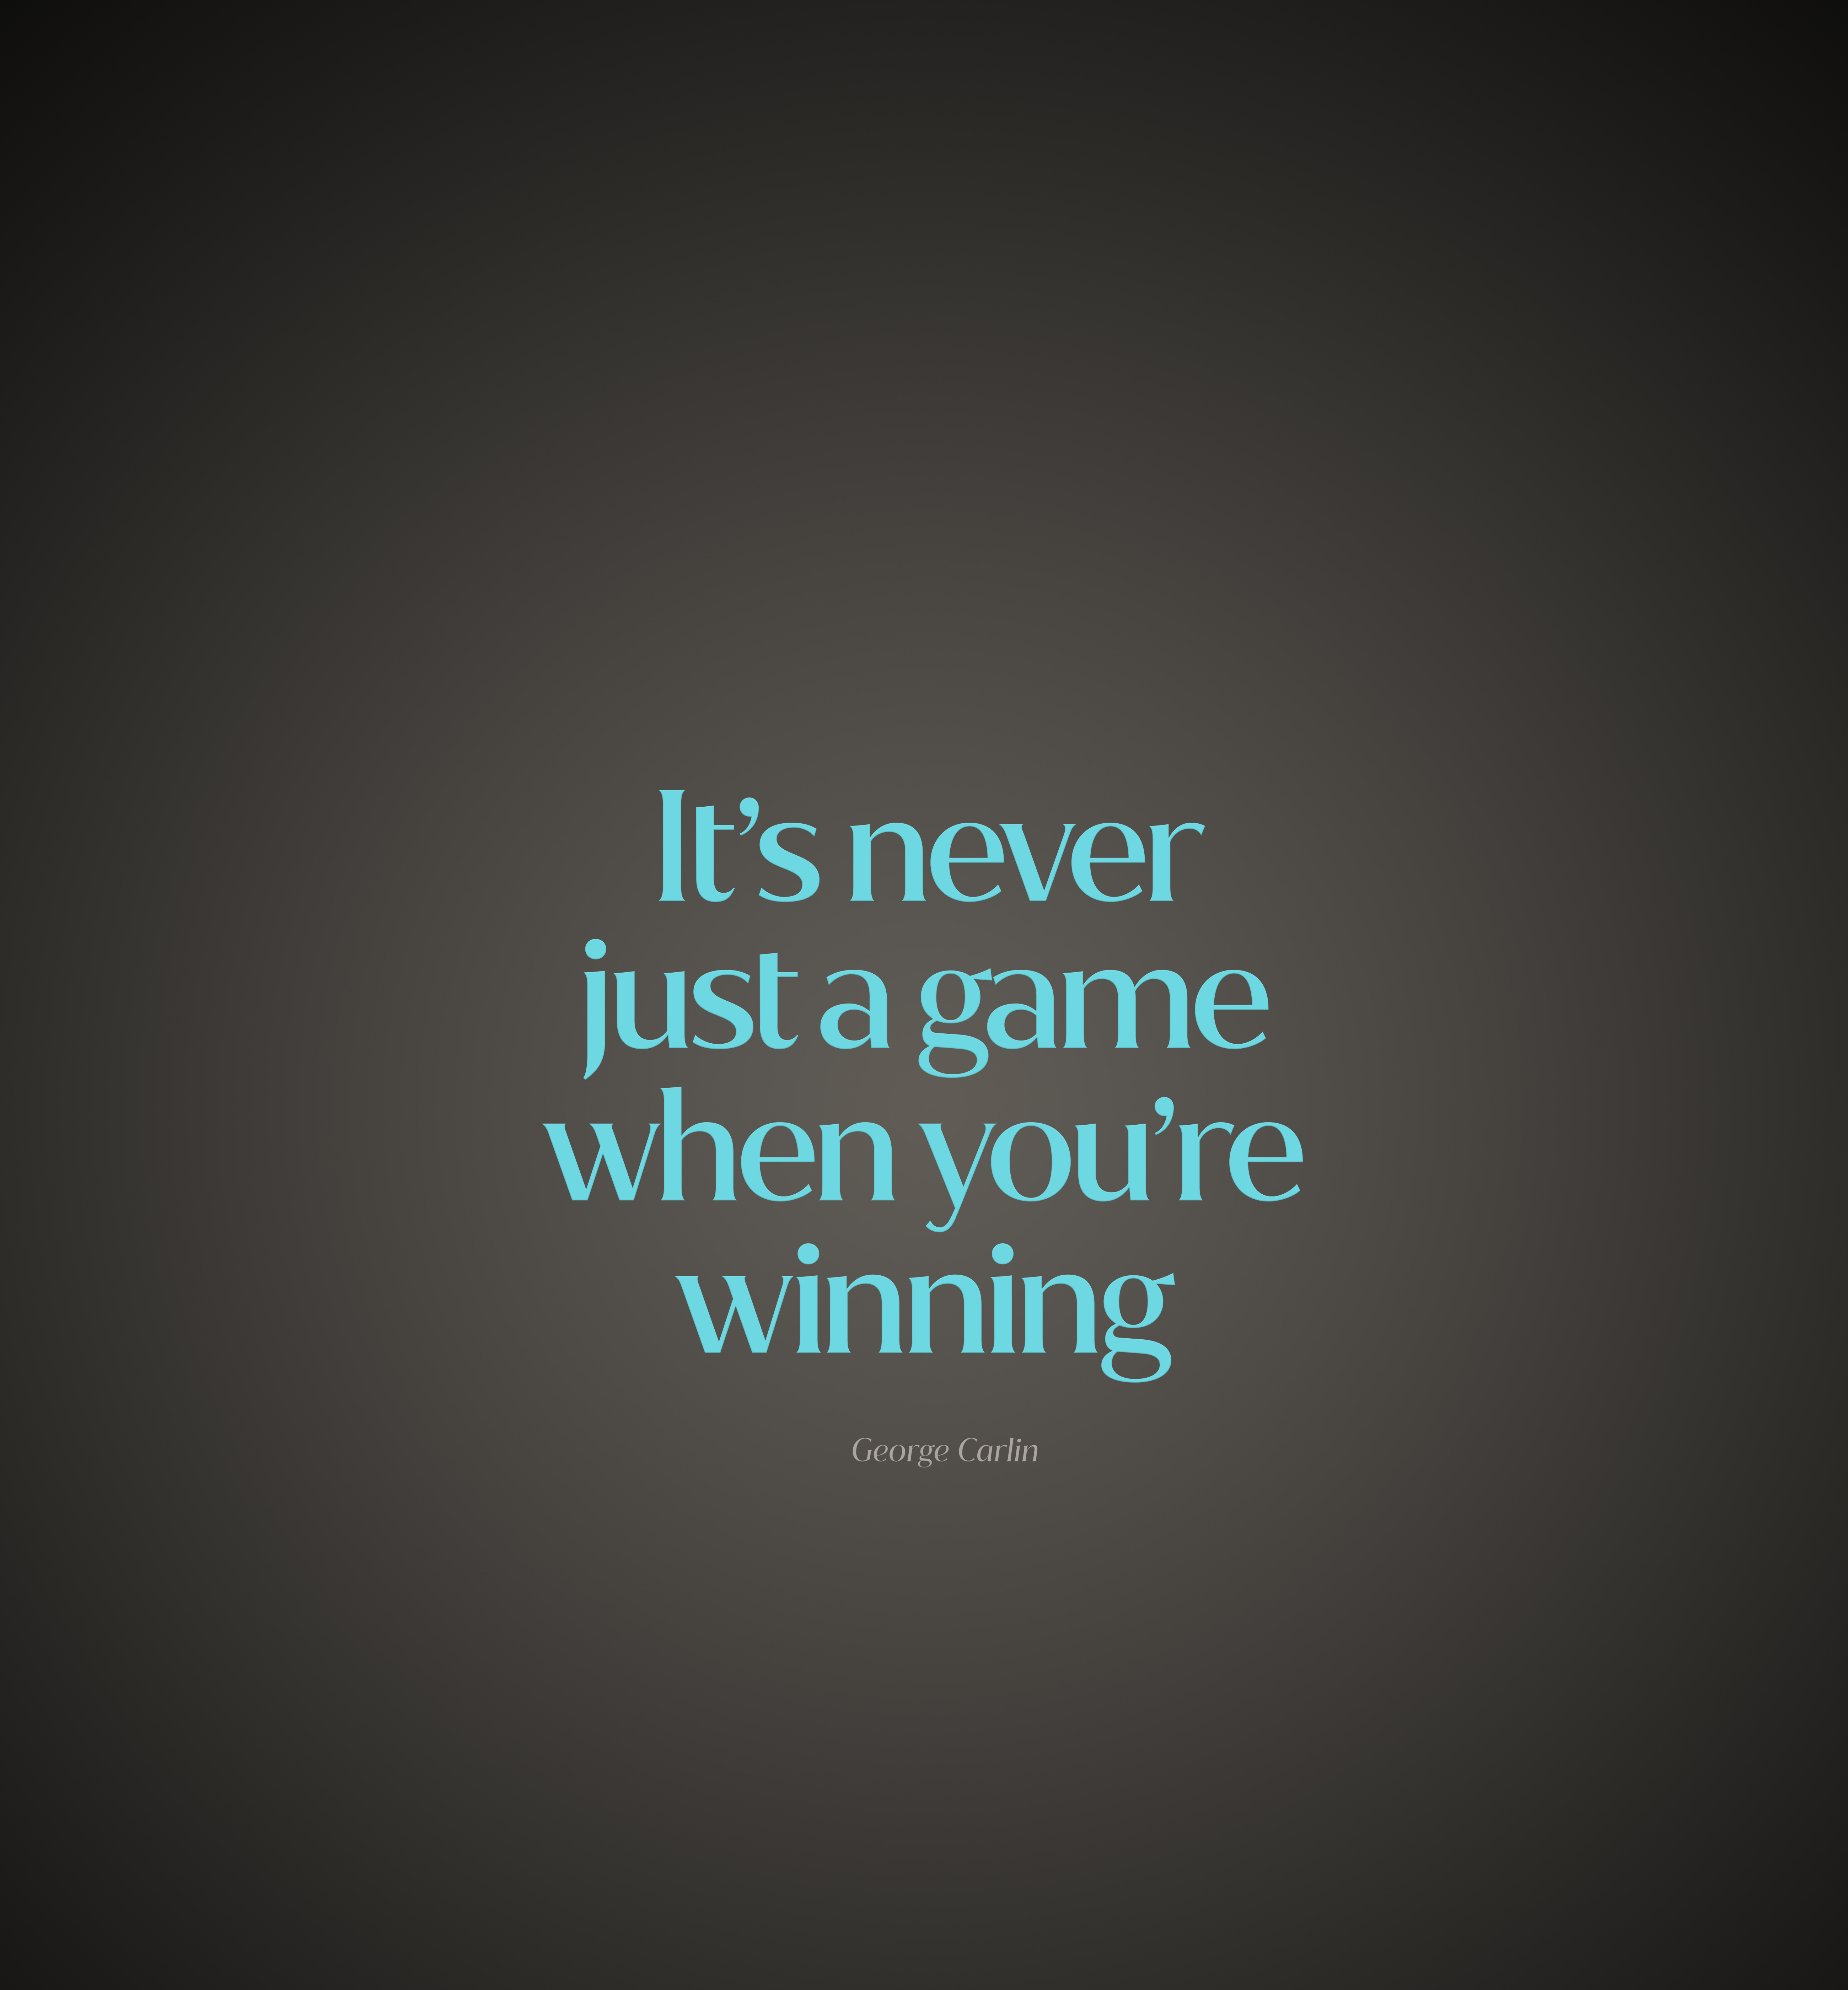 92334 download wallpaper words, phrase, game, quote, quotation, utterance, win screensavers and pictures for free